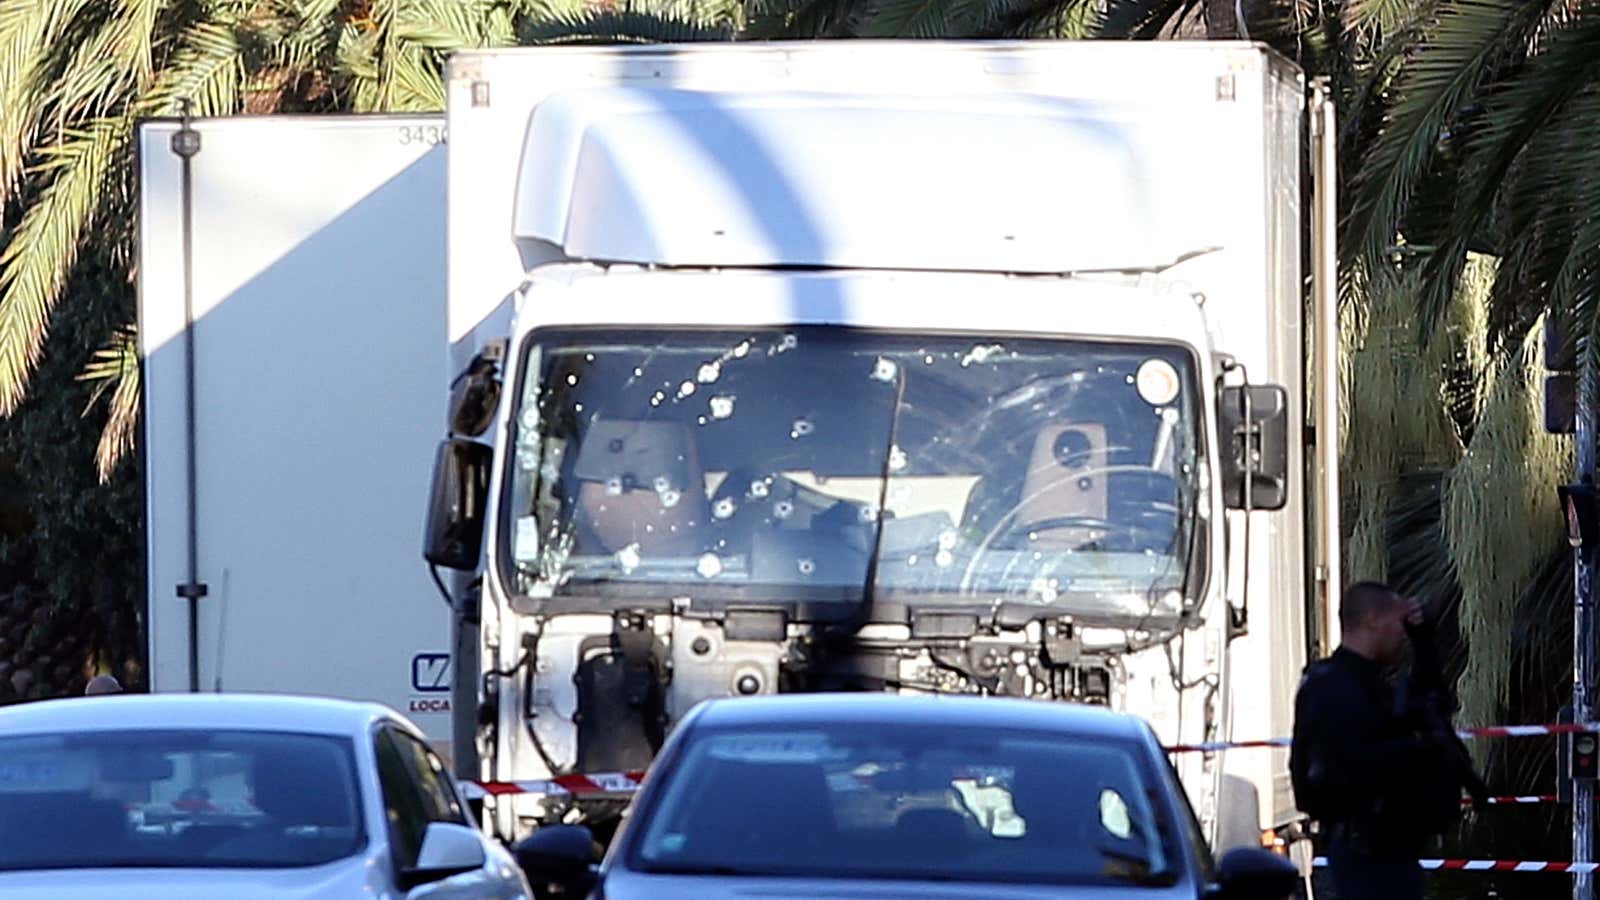 The truck which slammed into a crowd in Nice on July 14, killing over 80 people.